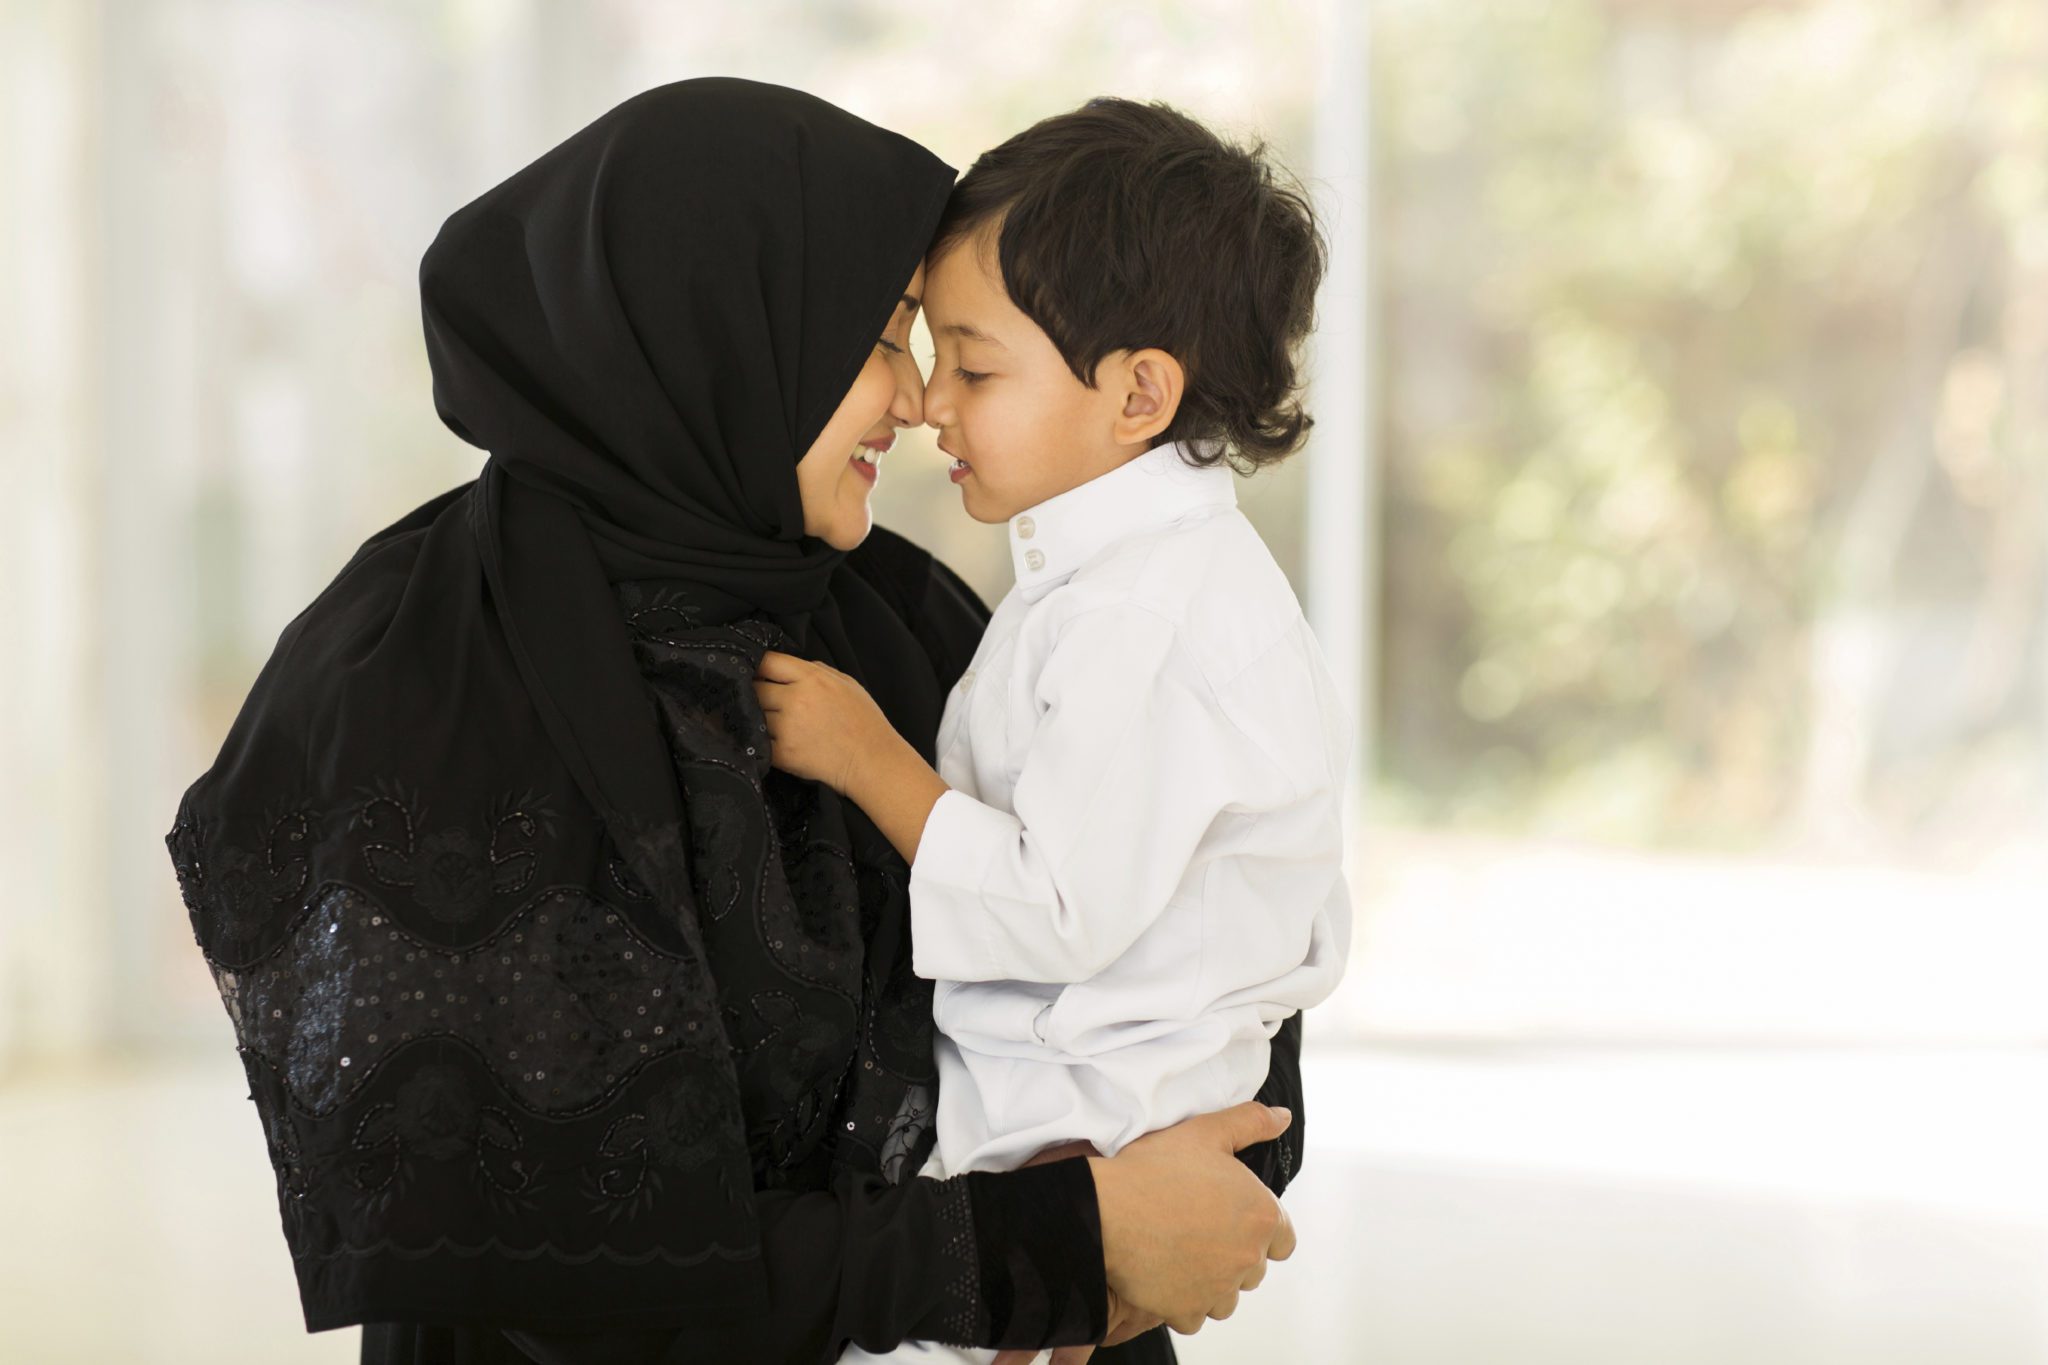 Muslim children may be hearing harsh xenophobic statements. Parents need to respond with positivity.